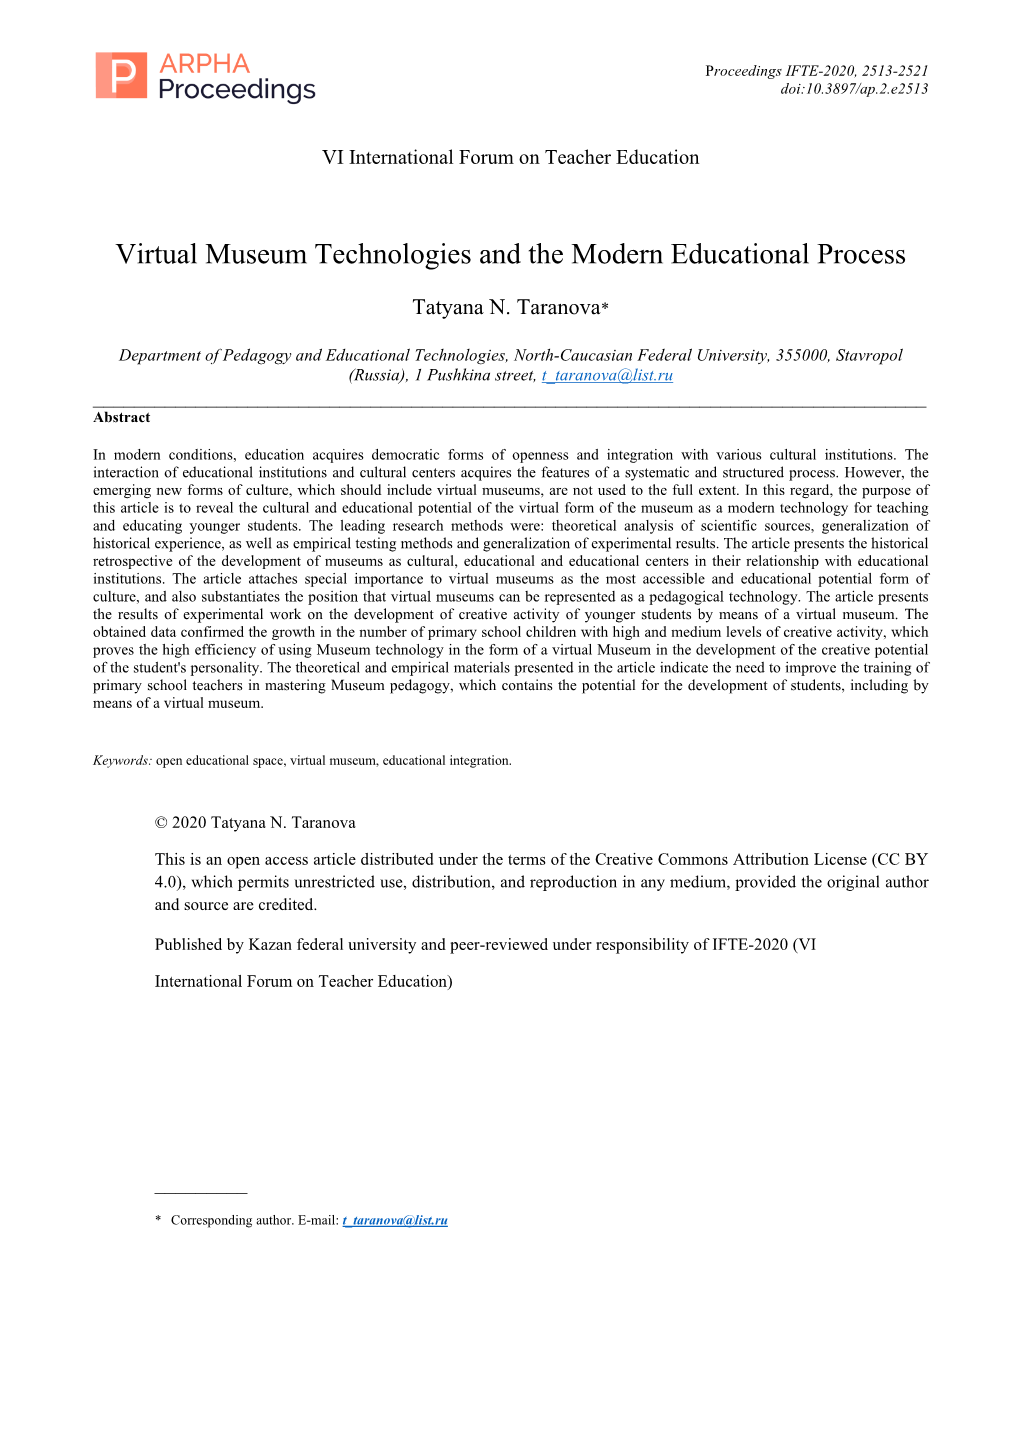 Virtual Museum Technologies and the Modern Educational Process